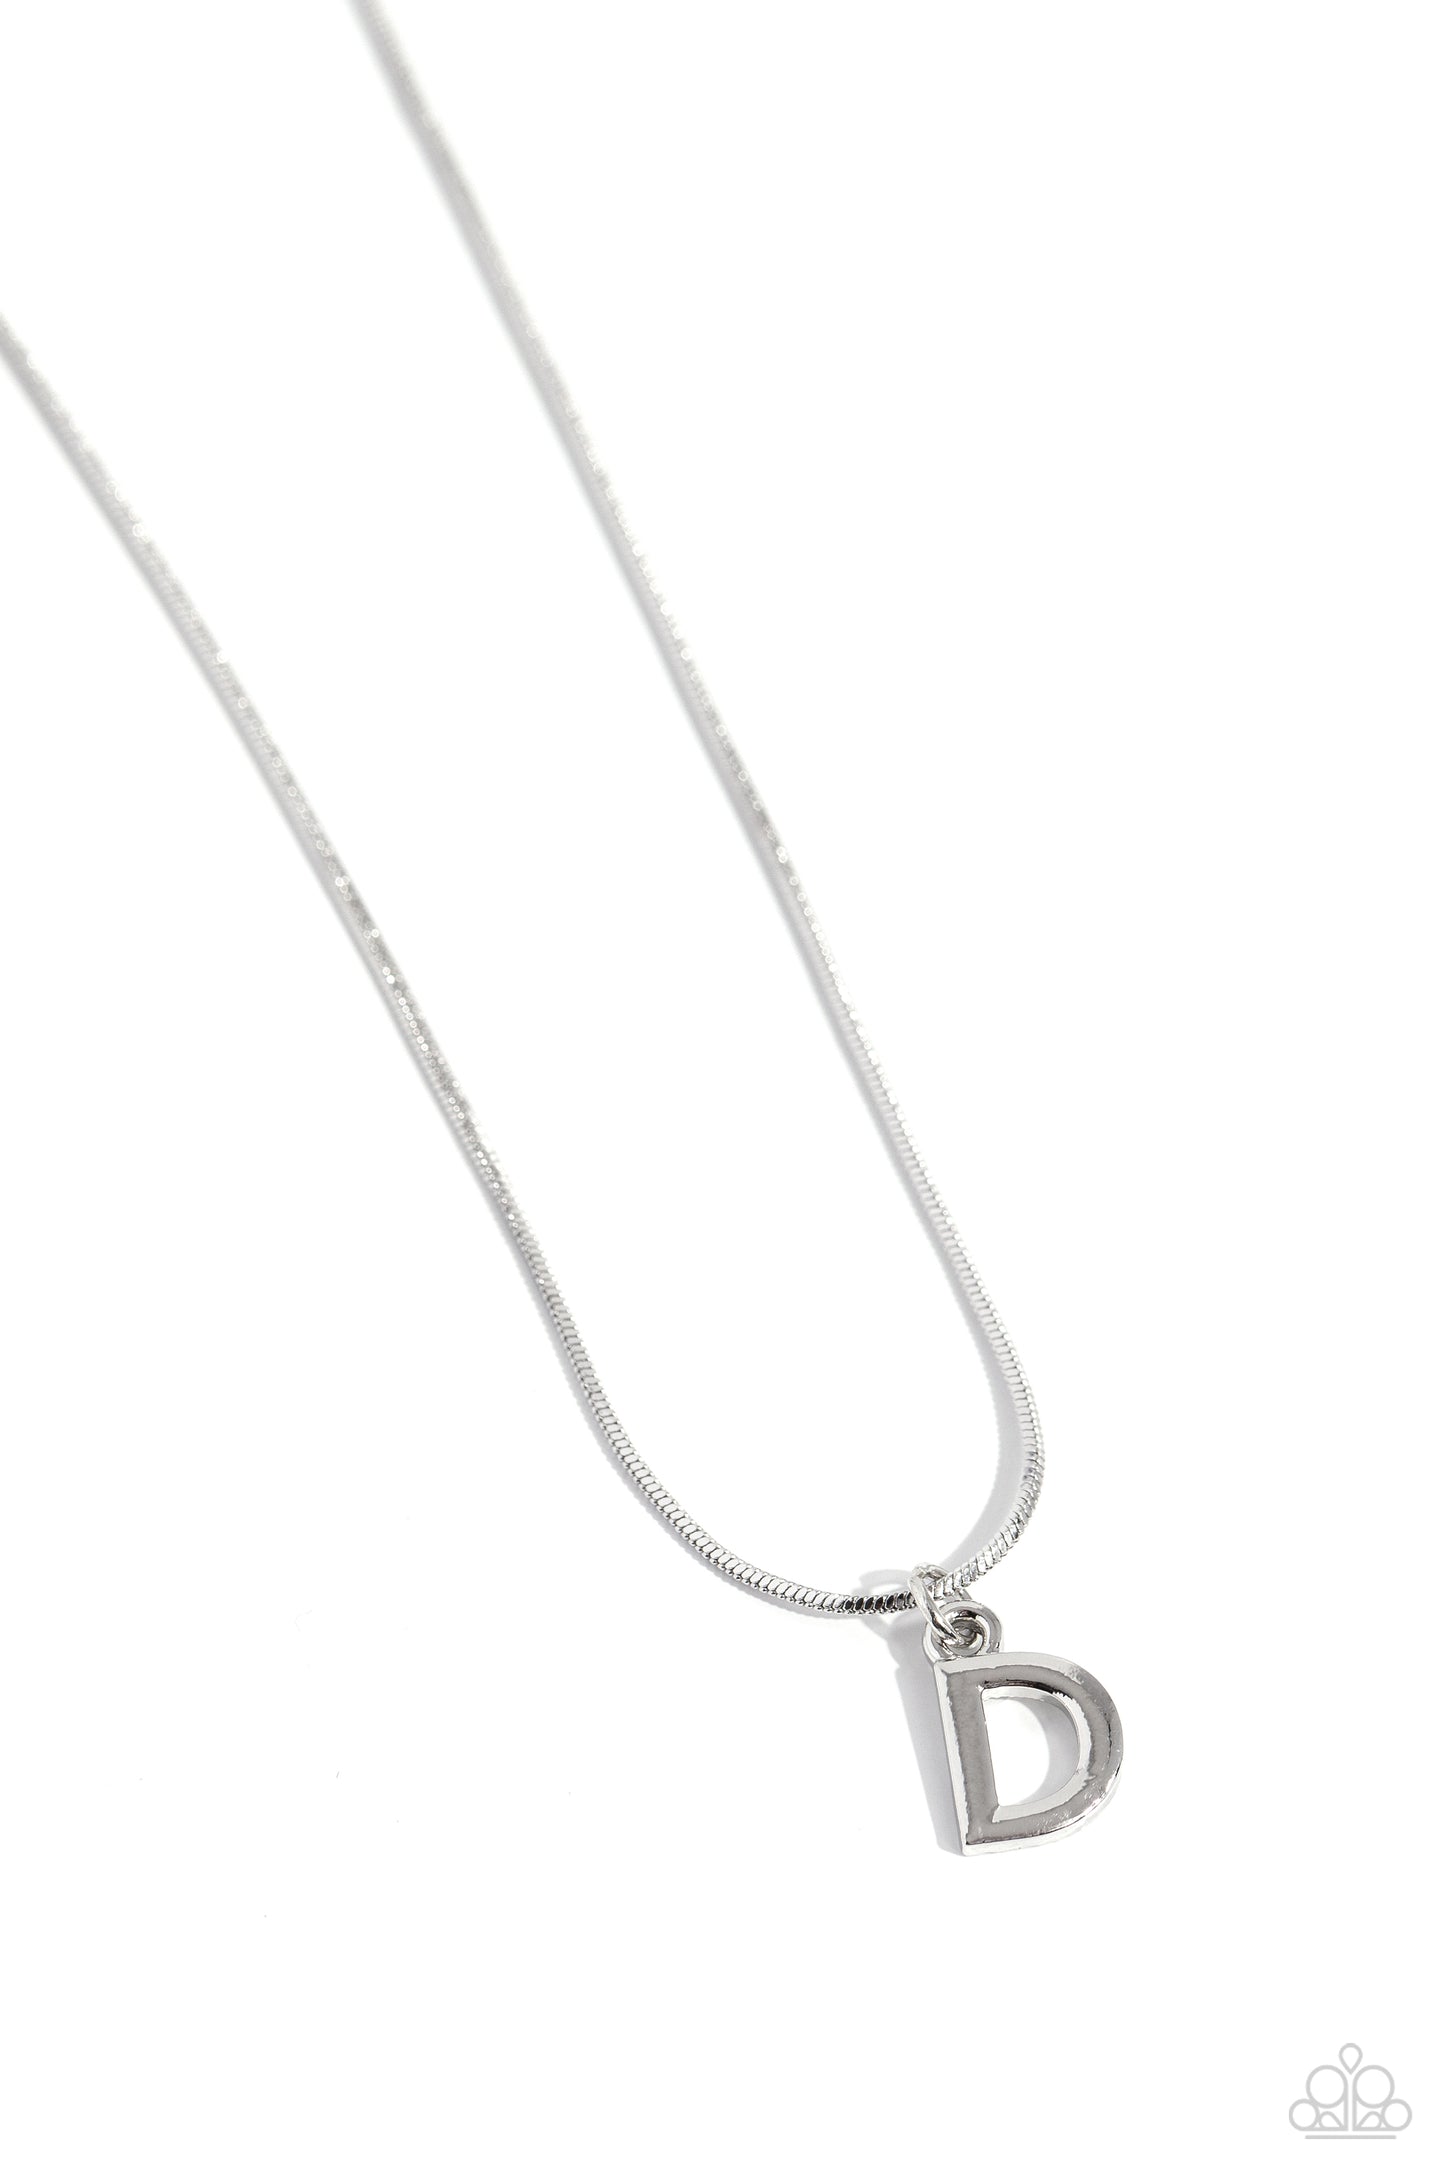 Seize the Initial - Silver - D Necklace